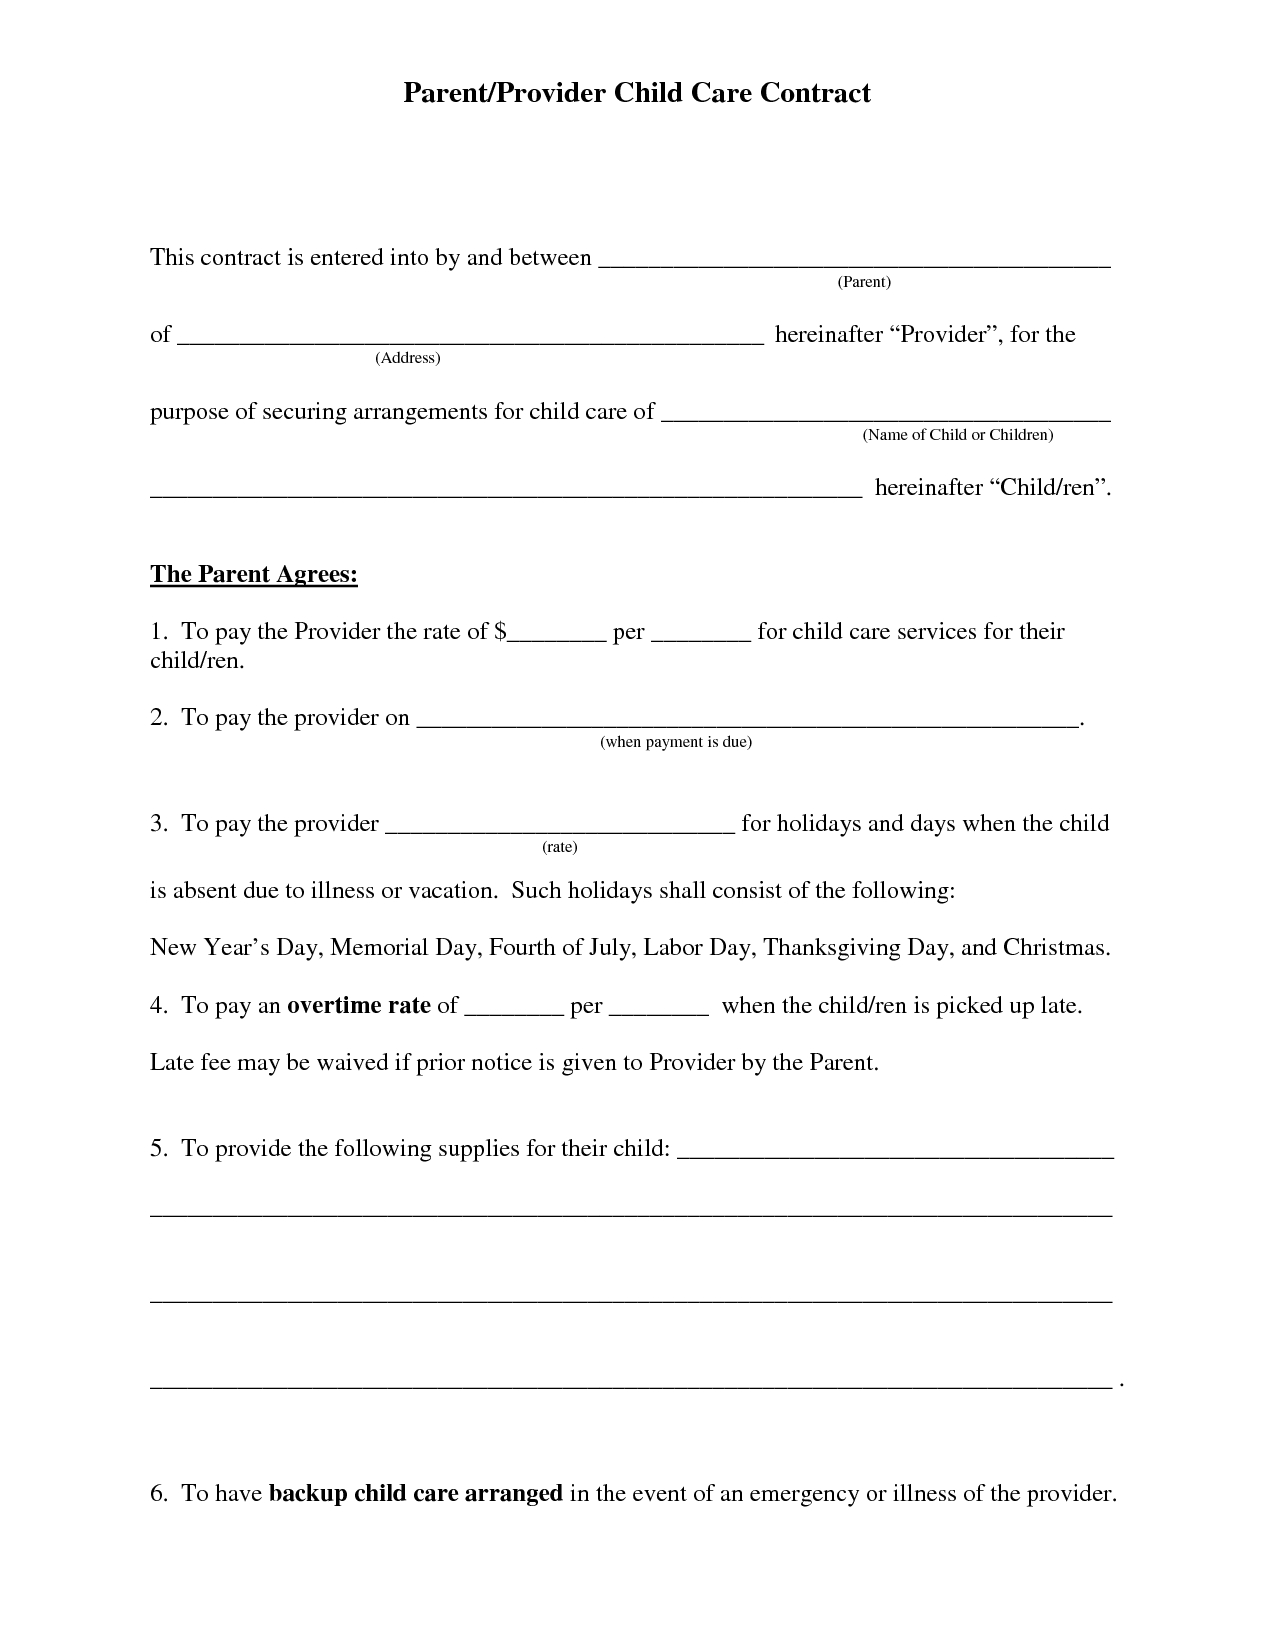 Free Daycare Contract Forms | Daycare Forms | Daycare Contract - Free Printable Daycare Forms For Parents